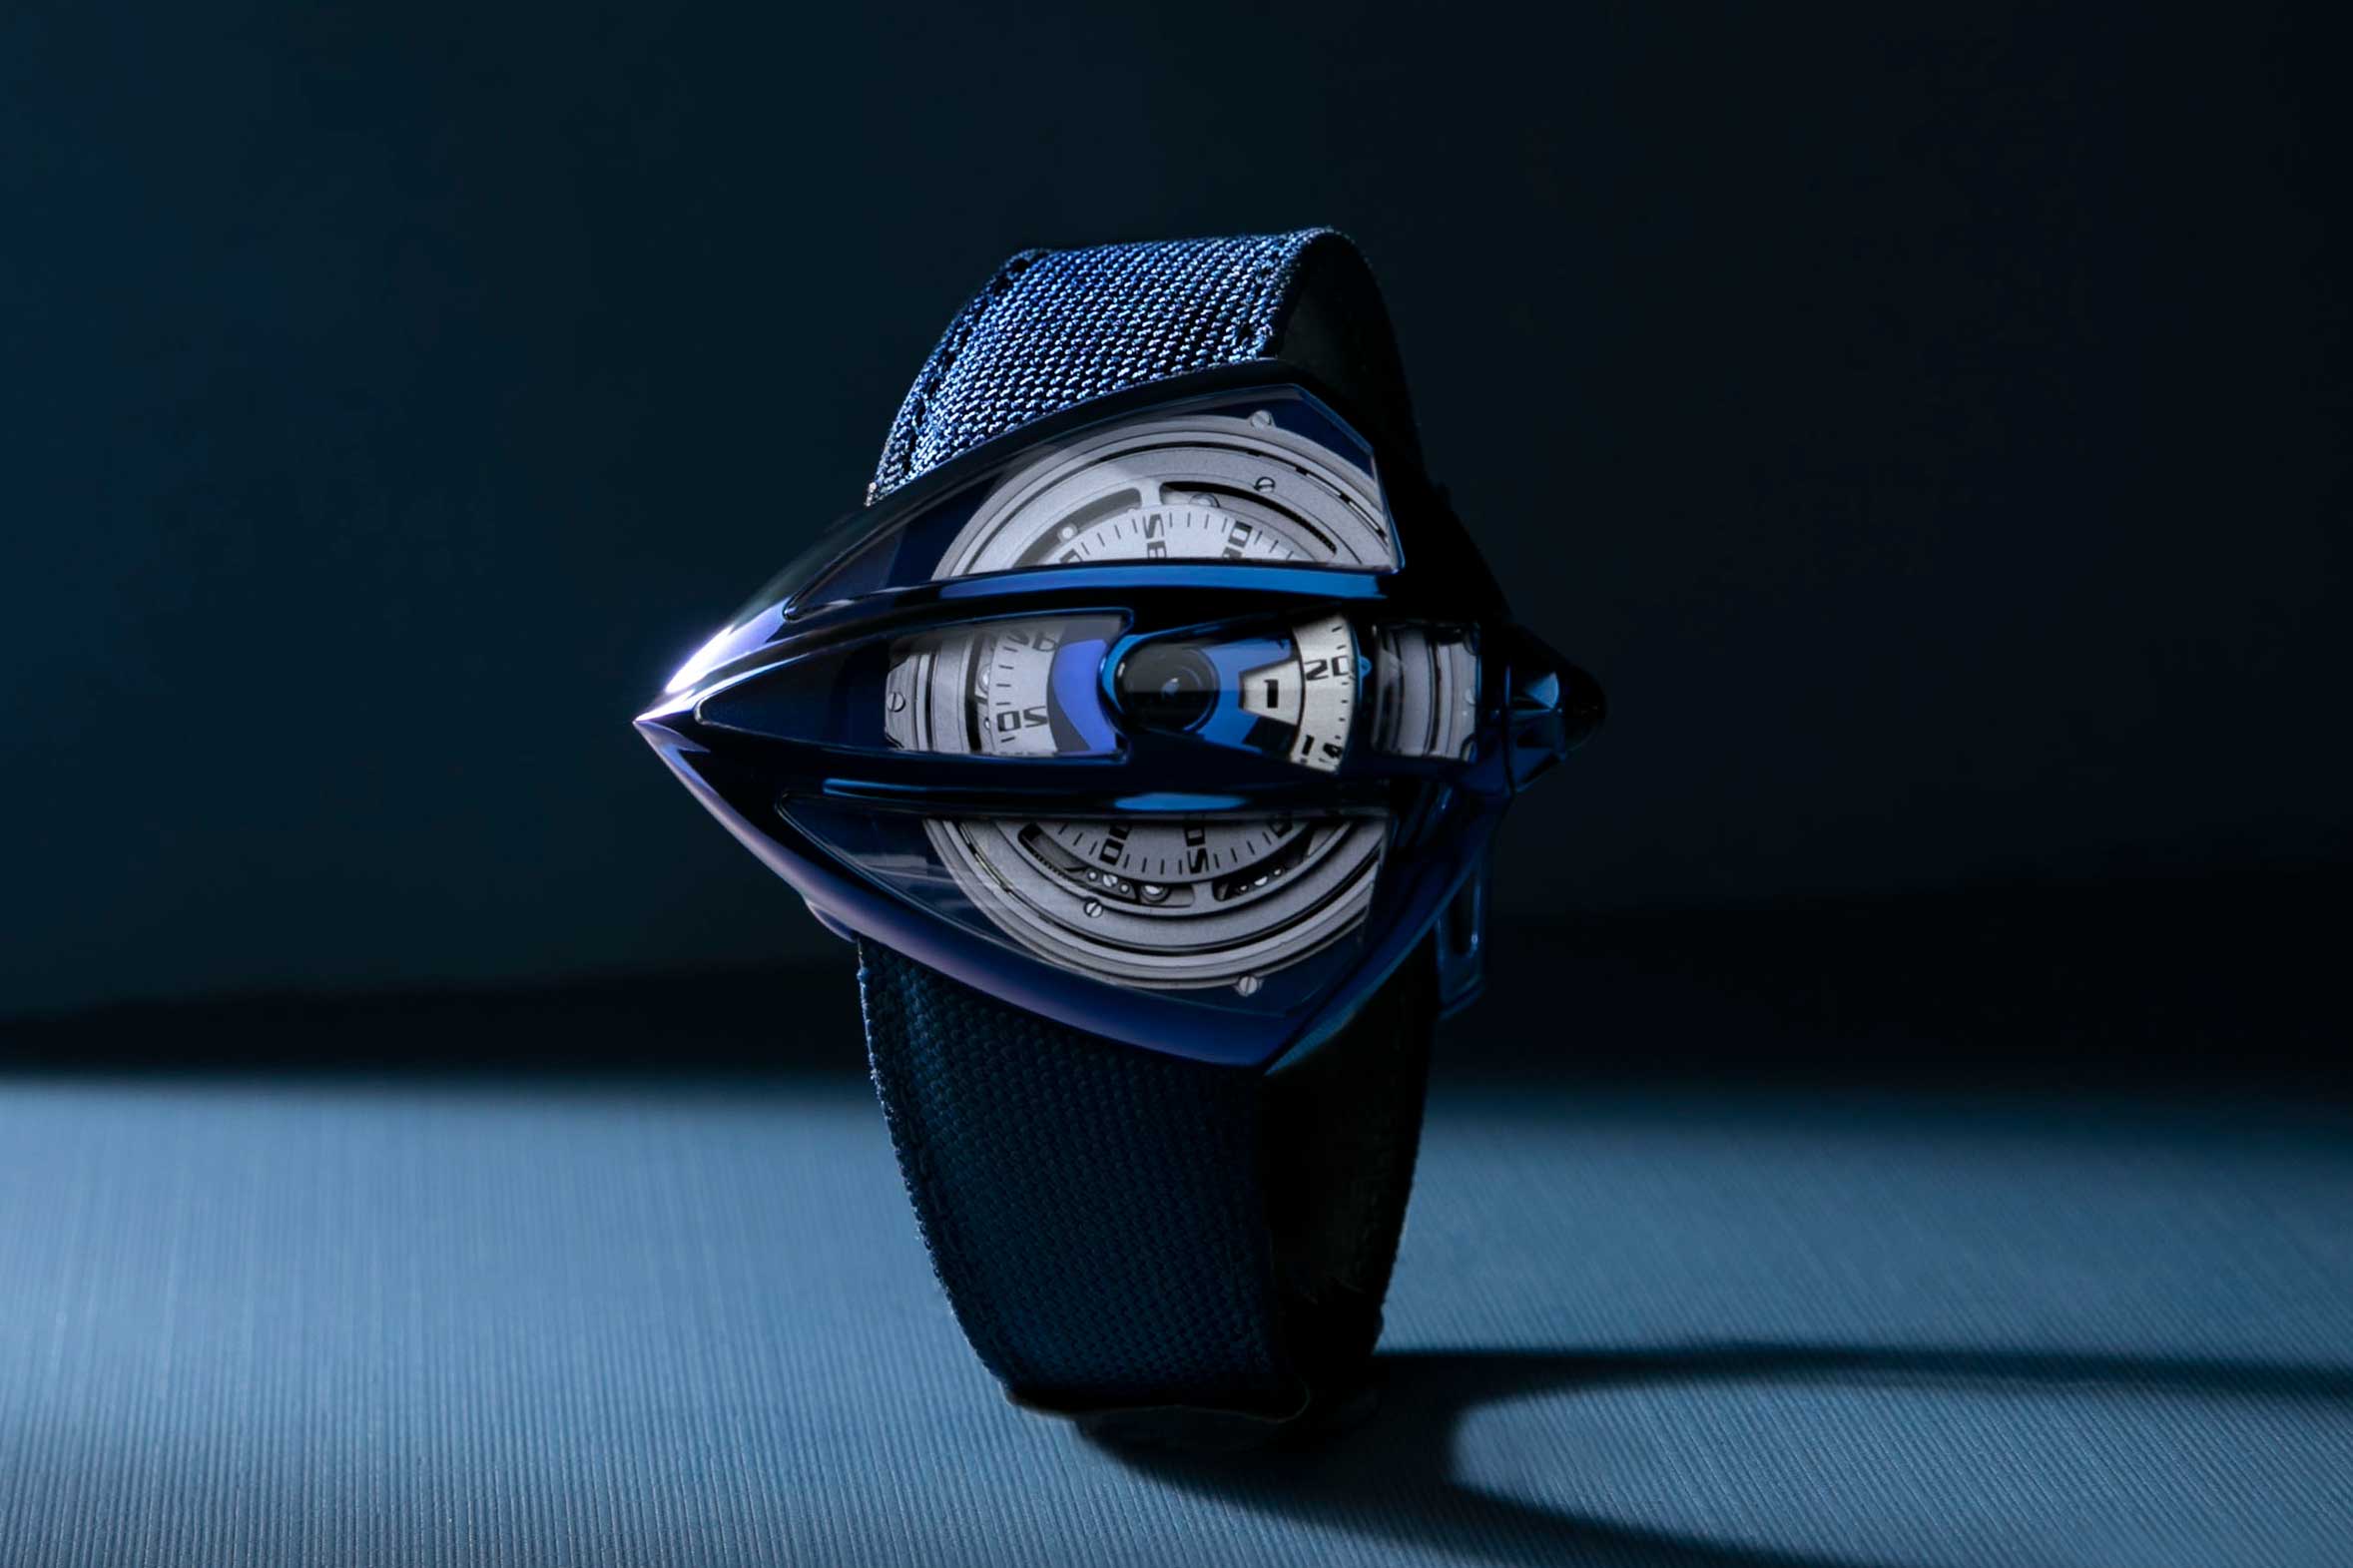 The De Bethune Dream Watch 5 Tourbillon ‘Season 1’: A 10-piece limited edition presented by De Bethune with the collaboration of its friend and fine watchmaking connoisseur Swizz Beatz.